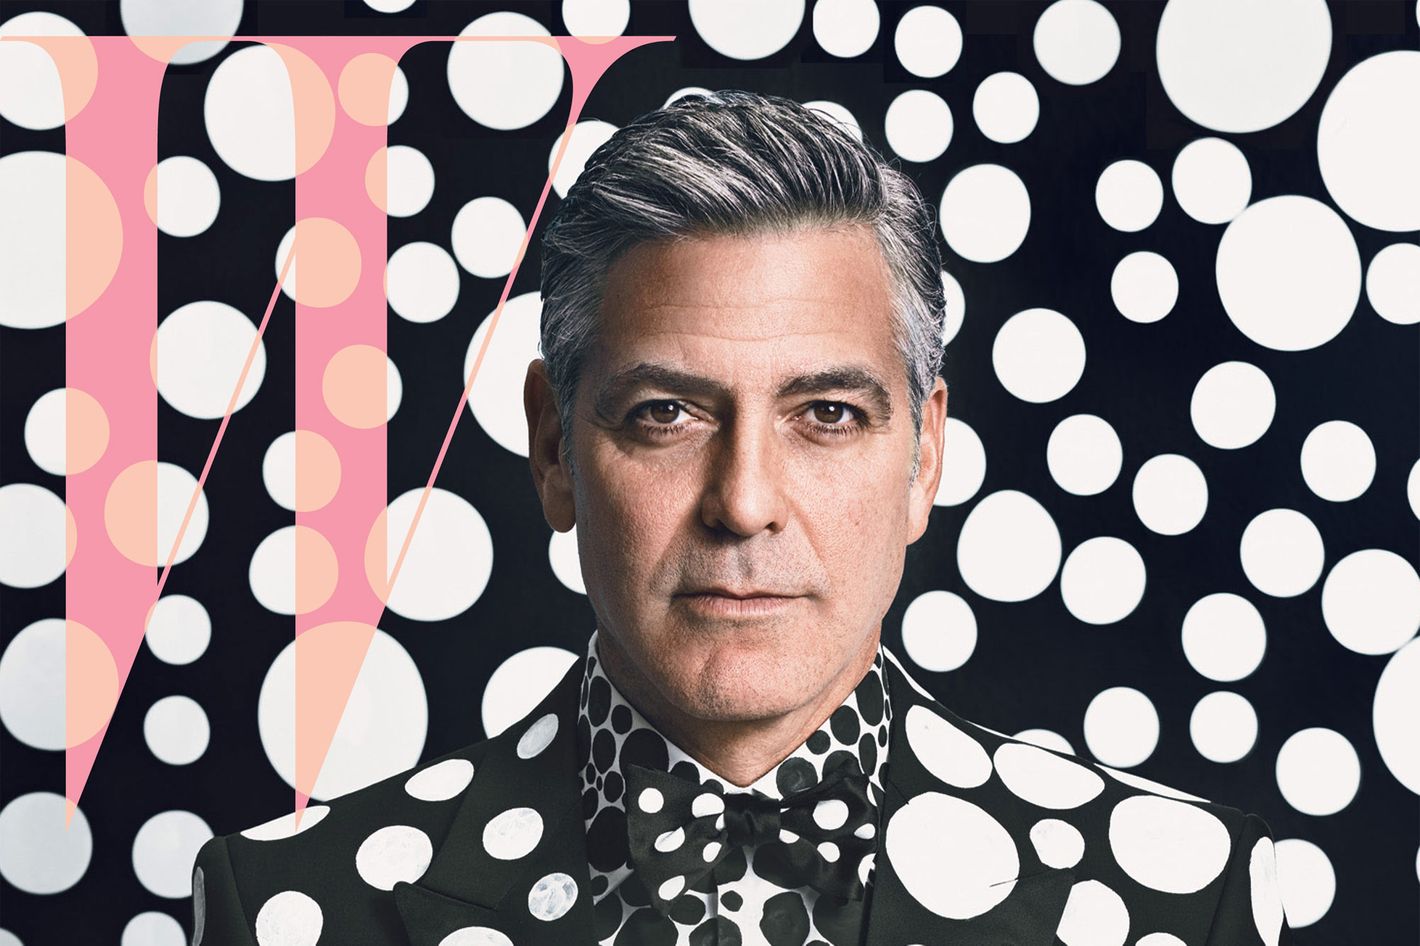 George Clooney Gets Covered In Polka Dots For W Magazine's Arts Issue  (PHOTOS)